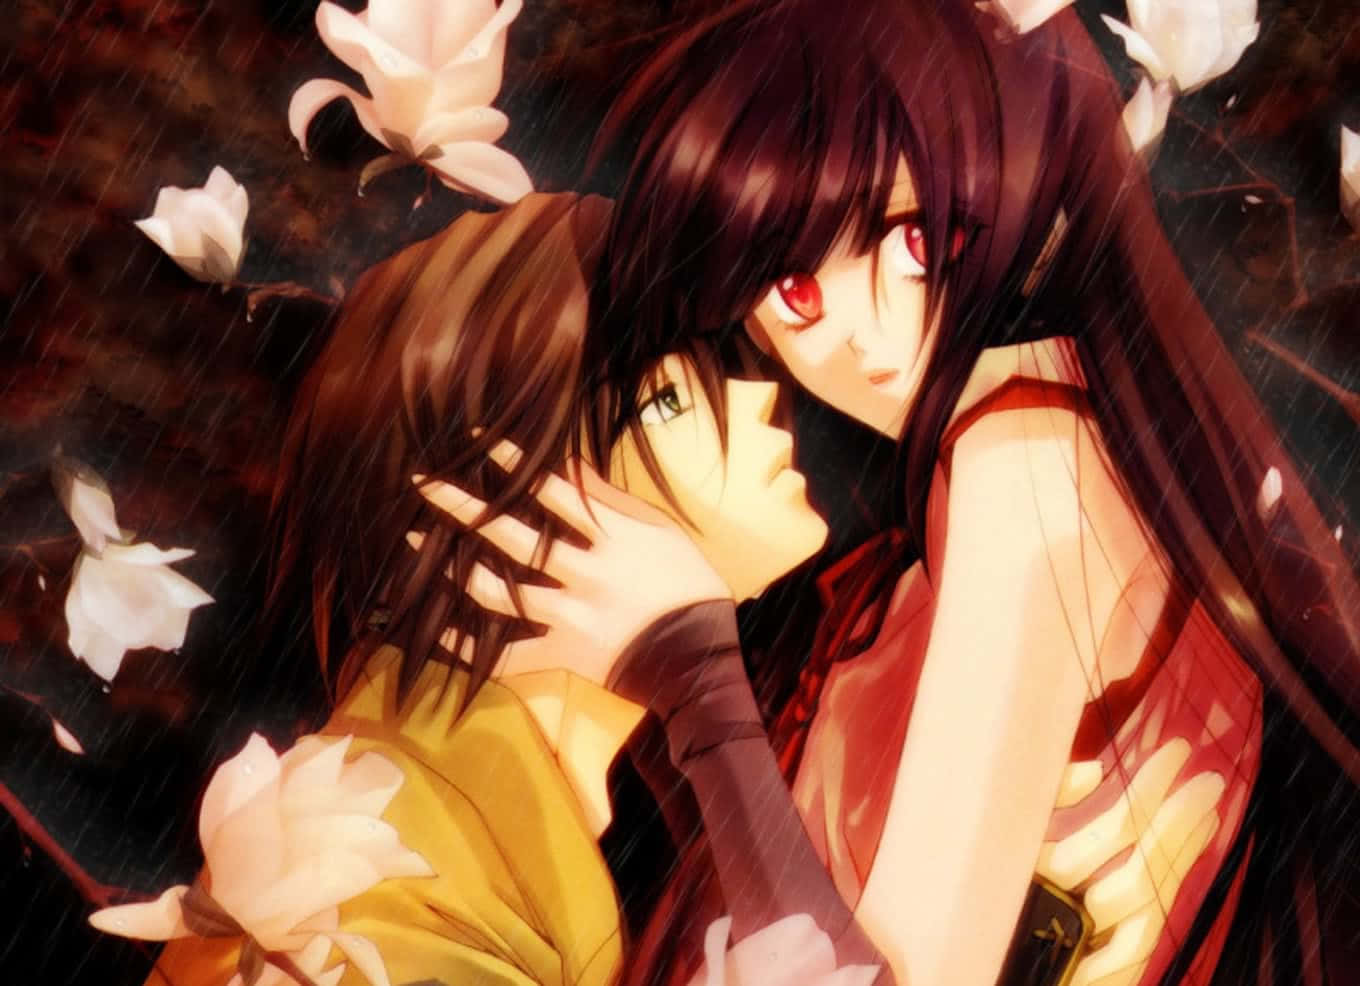 Top 10 Best Vampire Romance Anime Shows & Movies - My Teen Guide